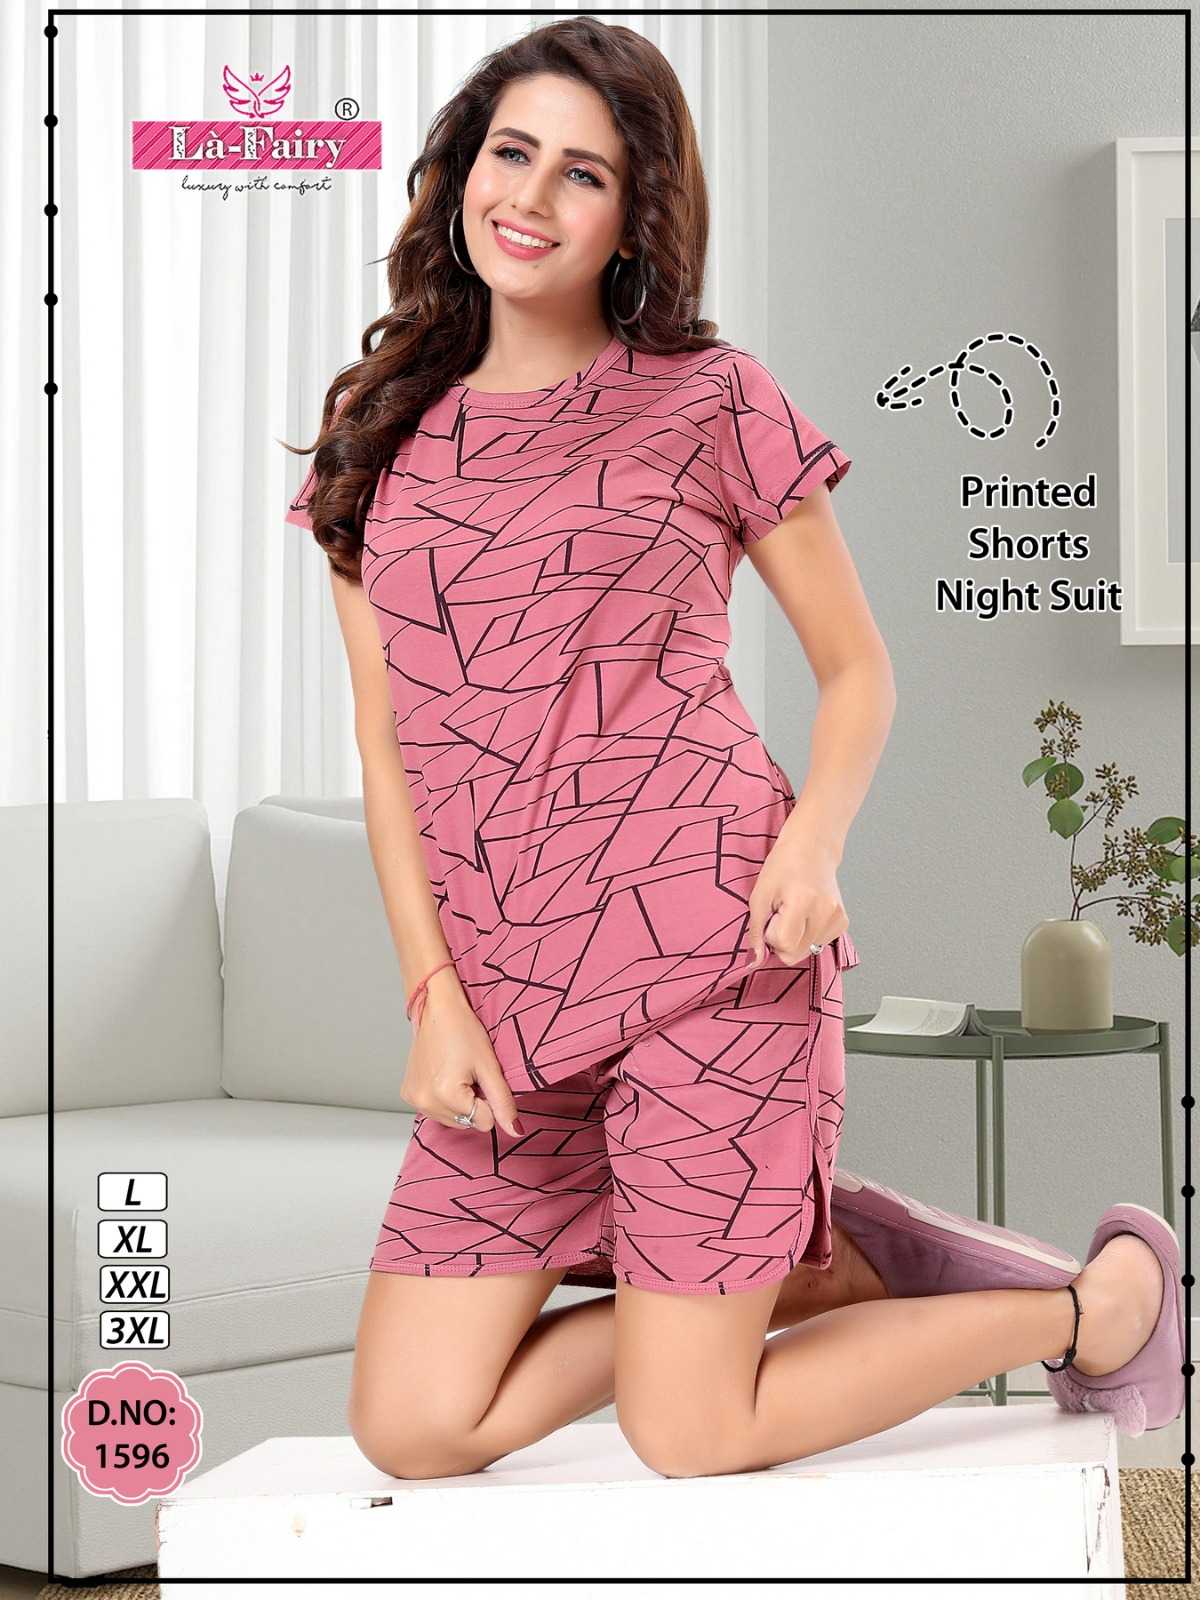  là fairy present 1596 launch regular use printed hosiery tshirt with hot pant nigth suit collection